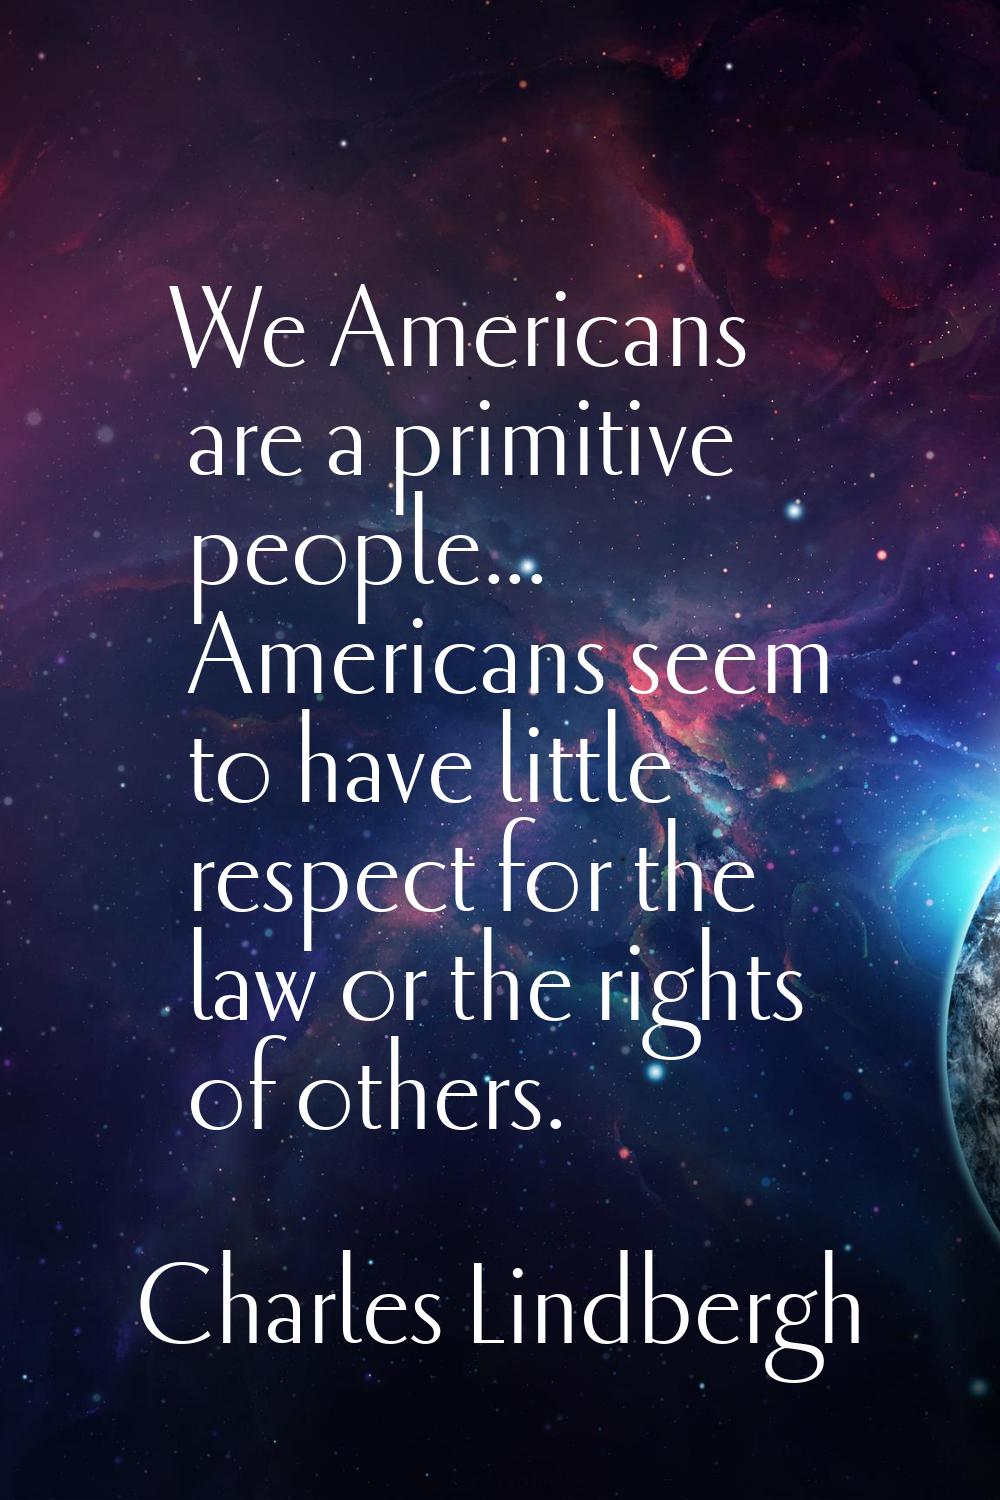 We Americans are a primitive people... Americans seem to have little respect for the law or the rig